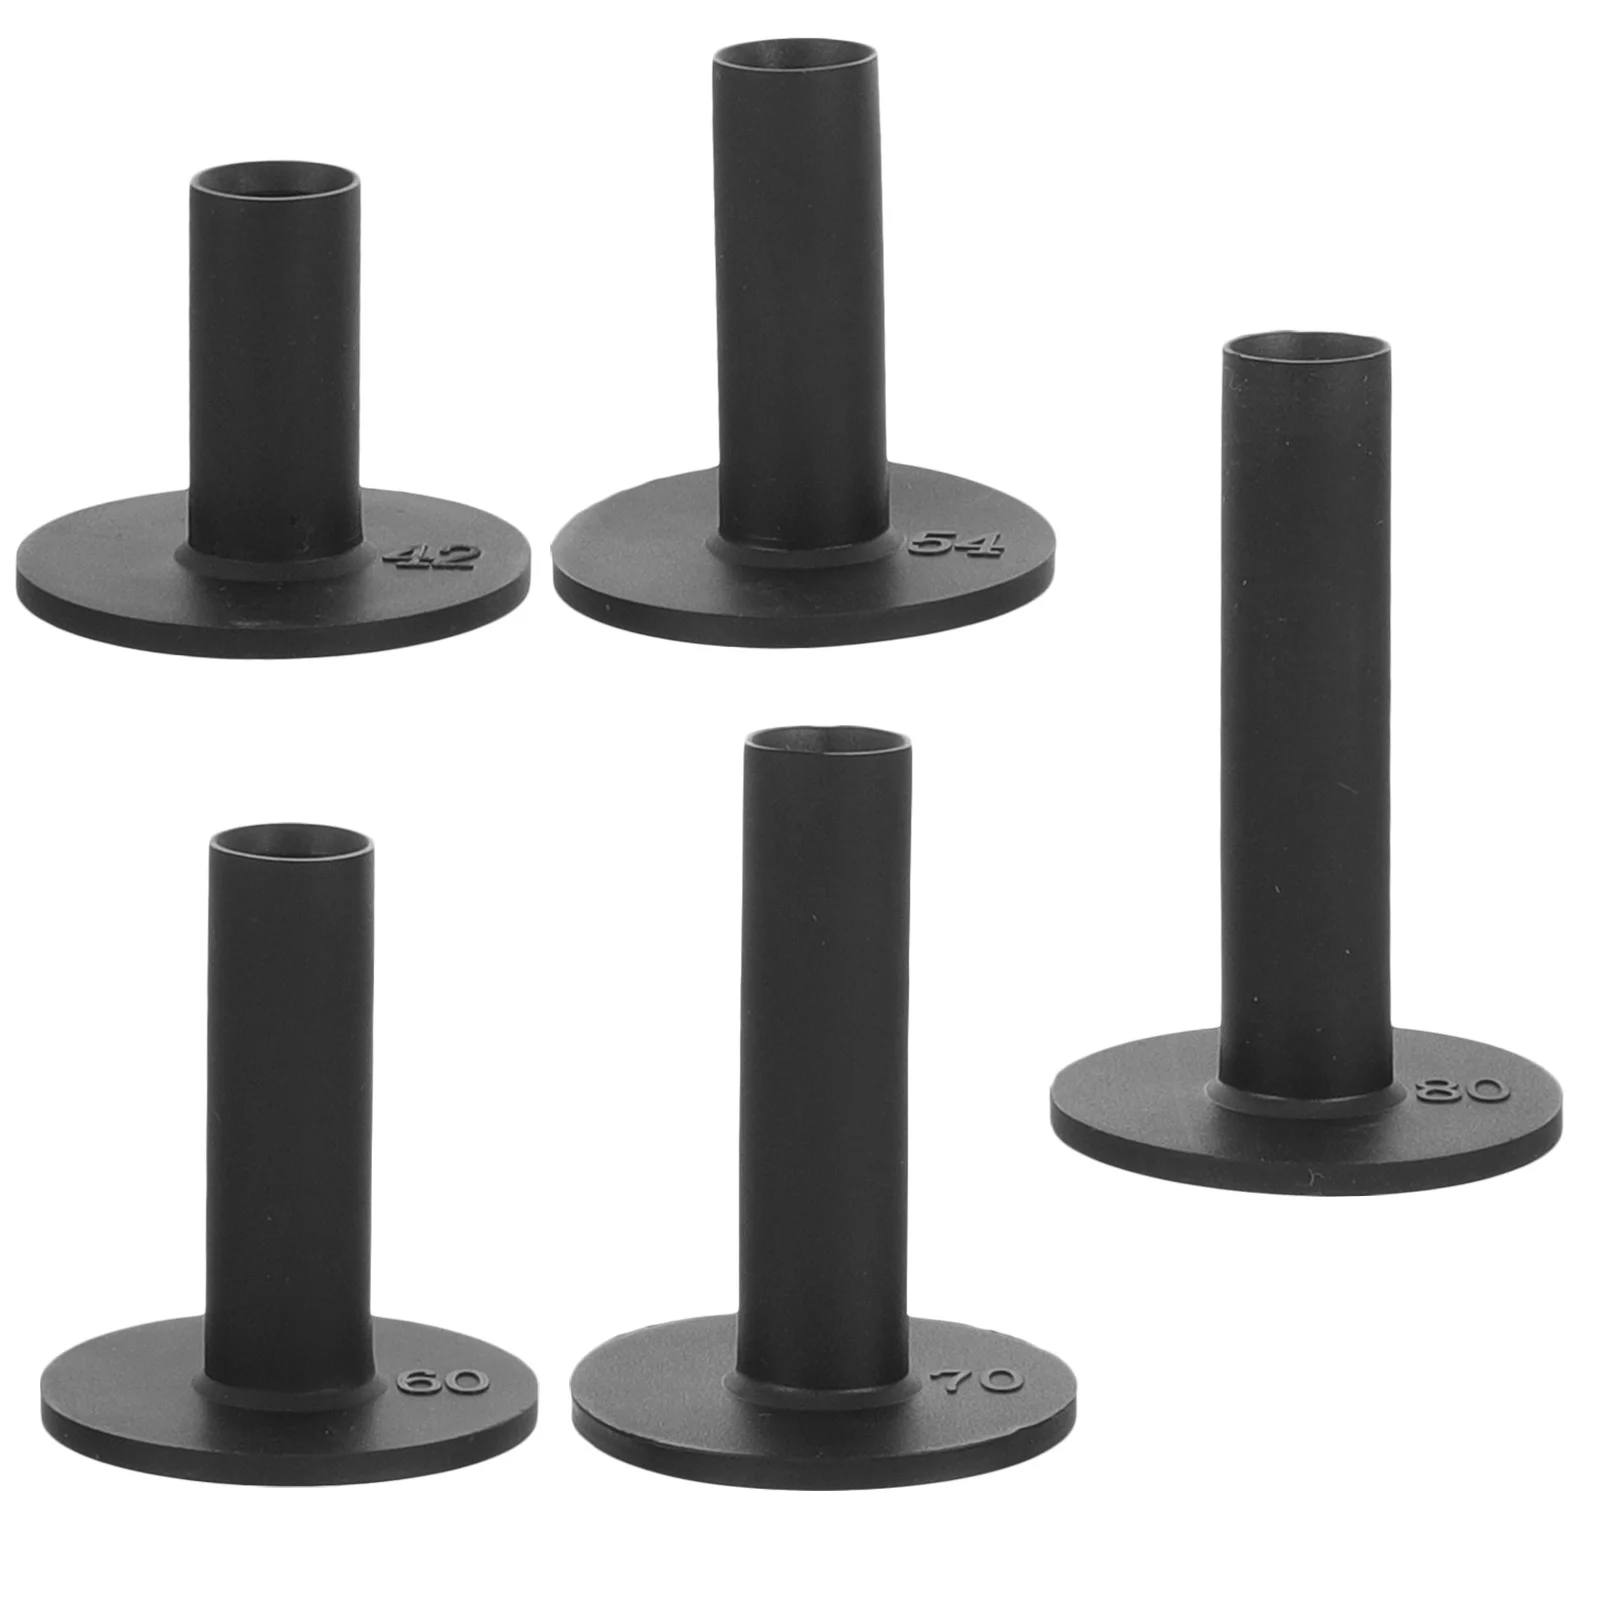 

Rubber Golf Tee Holders For Outdoor Sports Golf Practice Driving Range 50mm 54mm 60mm 70mm 80mm Golf Ball Practice New